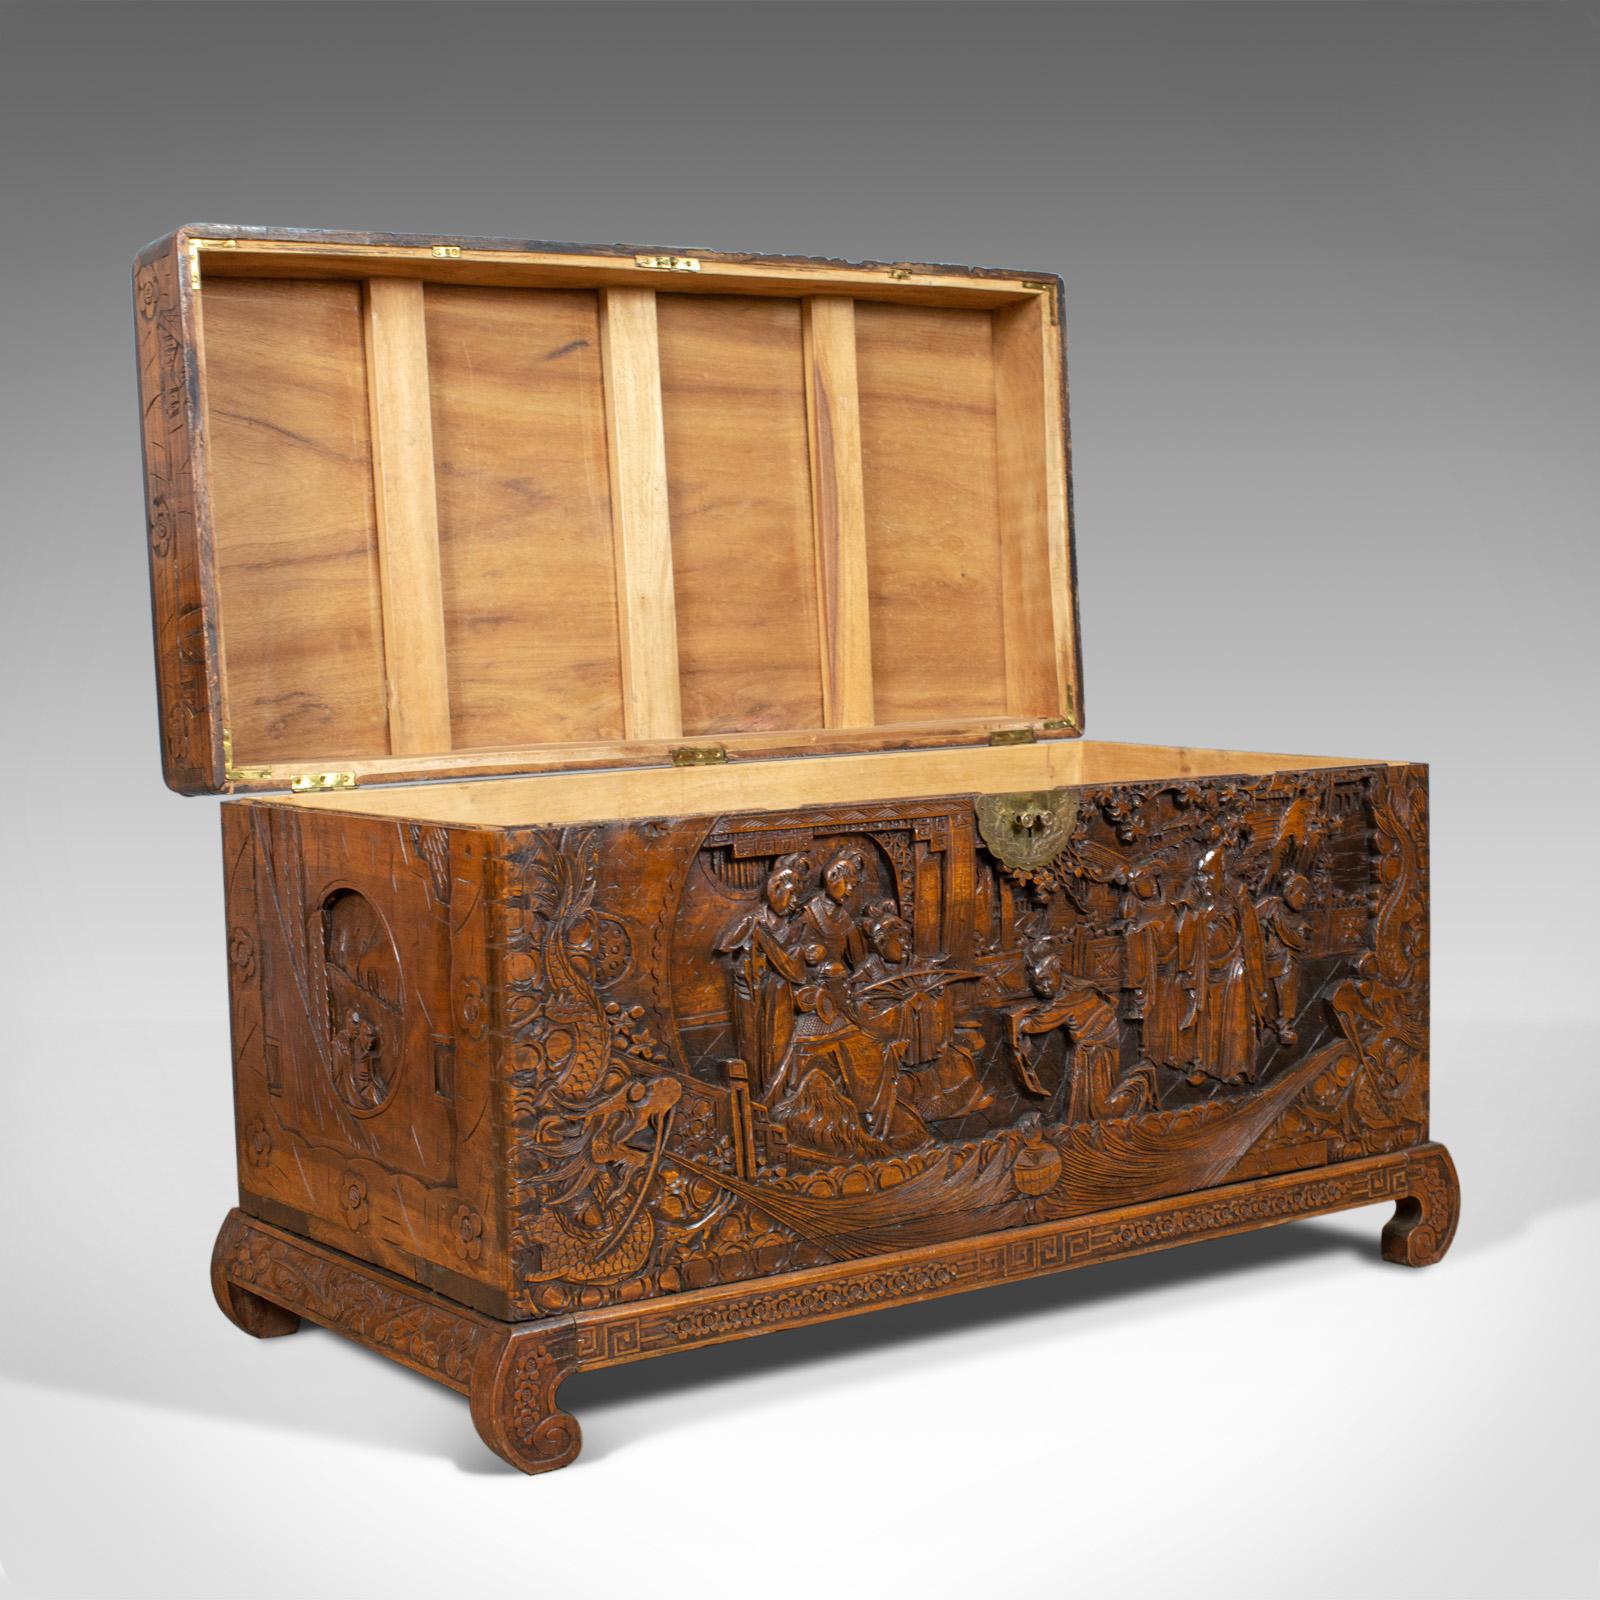 Chinese Export Vintage Camphor Wood Chest, Oriental, Carved, Trunk, circa 1930